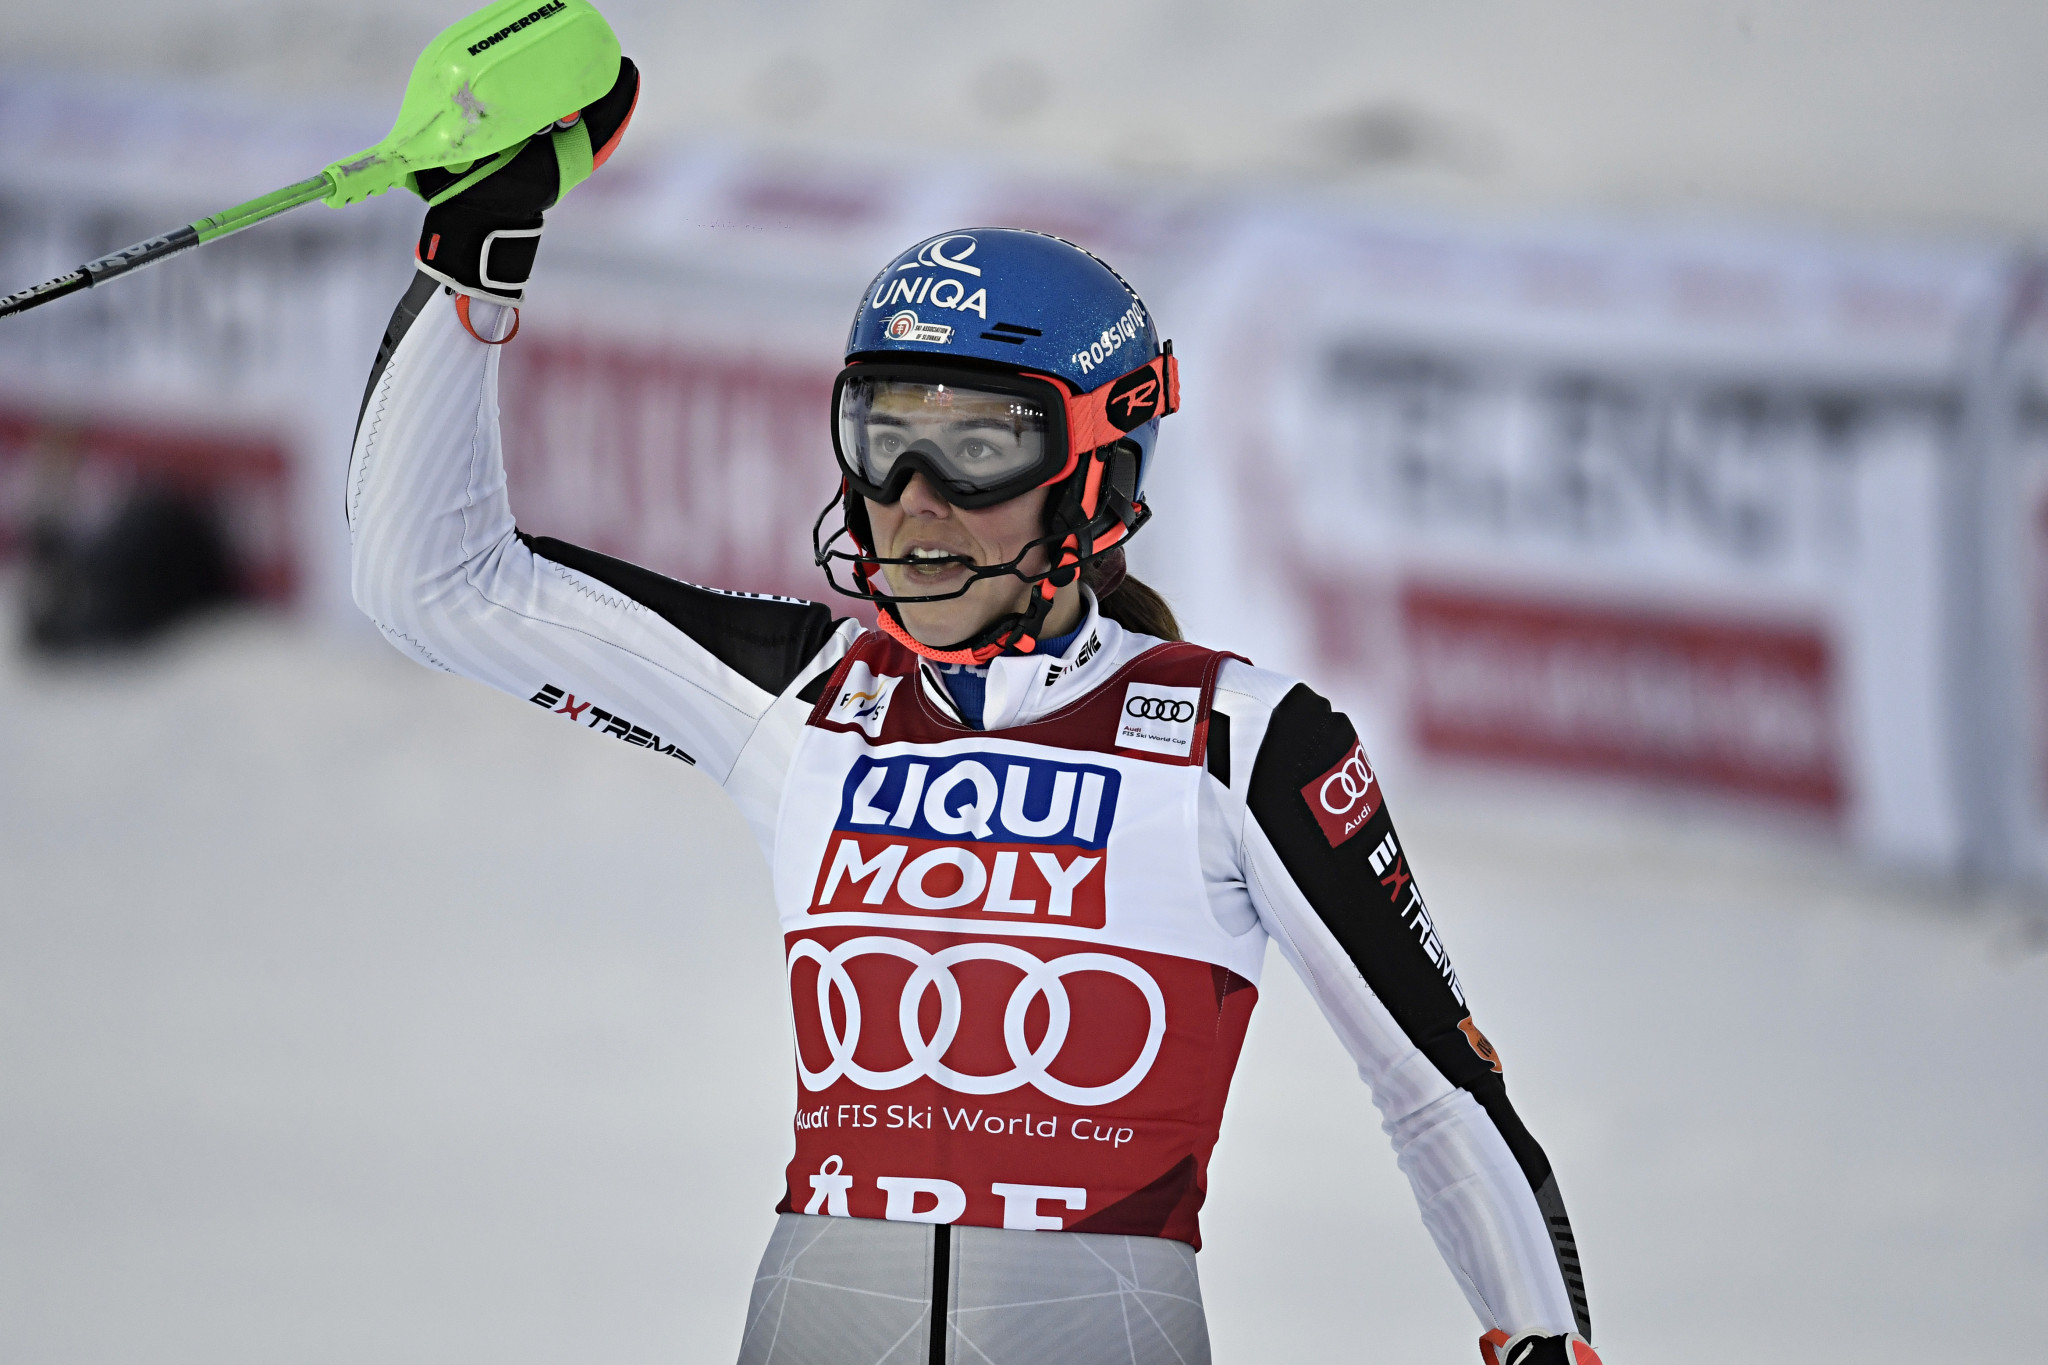 Petra Vlhová has taken the lead of the FIS Alpine Ski World Cup ©Getty Images